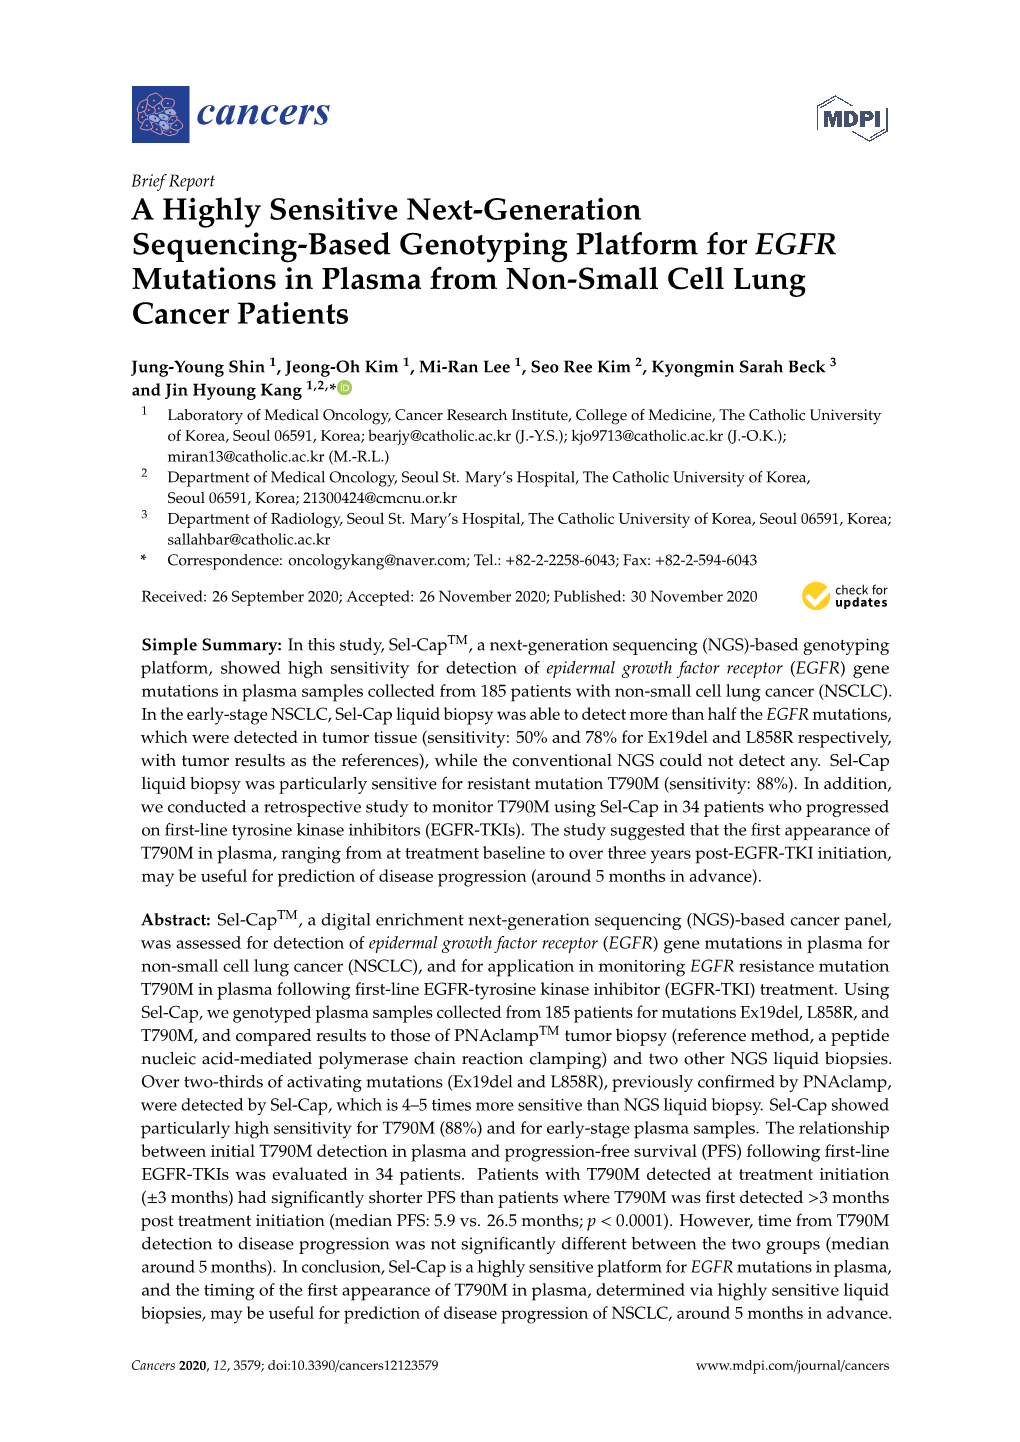 A Highly Sensitive Next-Generation Sequencing-Based Genotyping Platform for EGFR Mutations in Plasma from Non-Small Cell Lung Cancer Patients